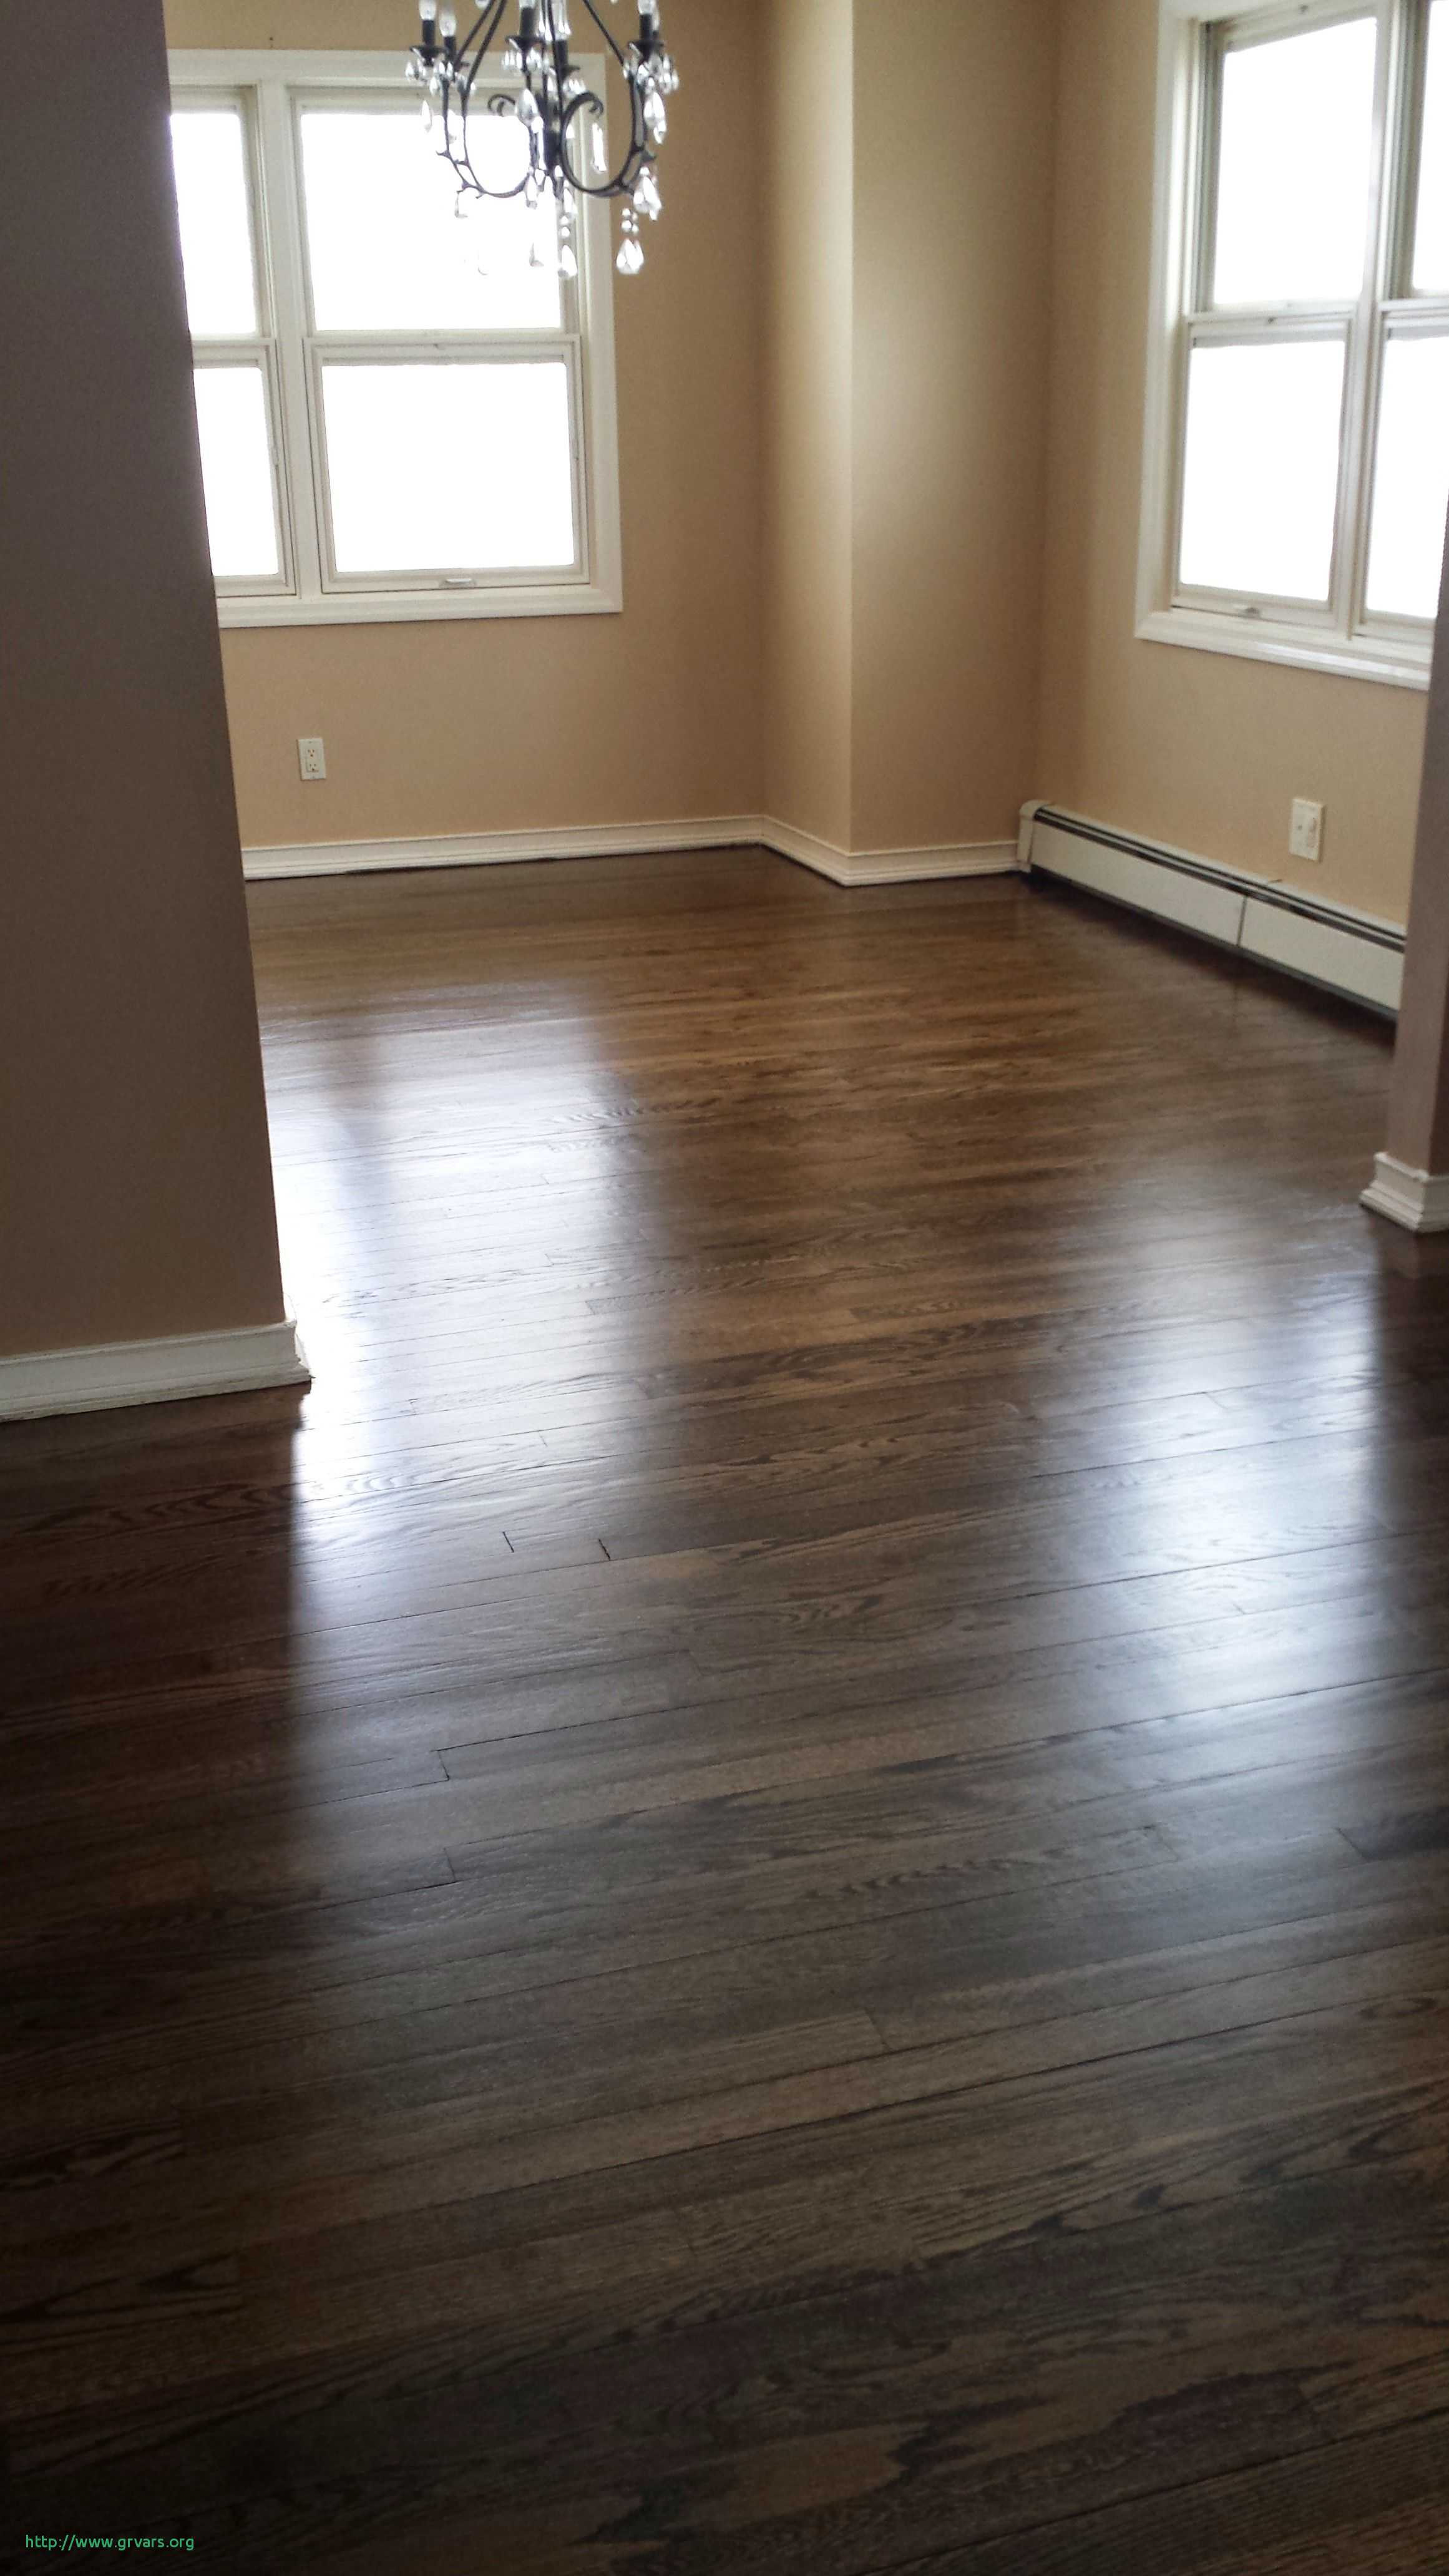 how much does a hardwood floor cost per square foot of cost of wooden flooring per sq ft meilleur de hardwood floor throughout cost of wooden flooring per sq ft nouveau amusing refinishingod floors diy network refinish parquet without